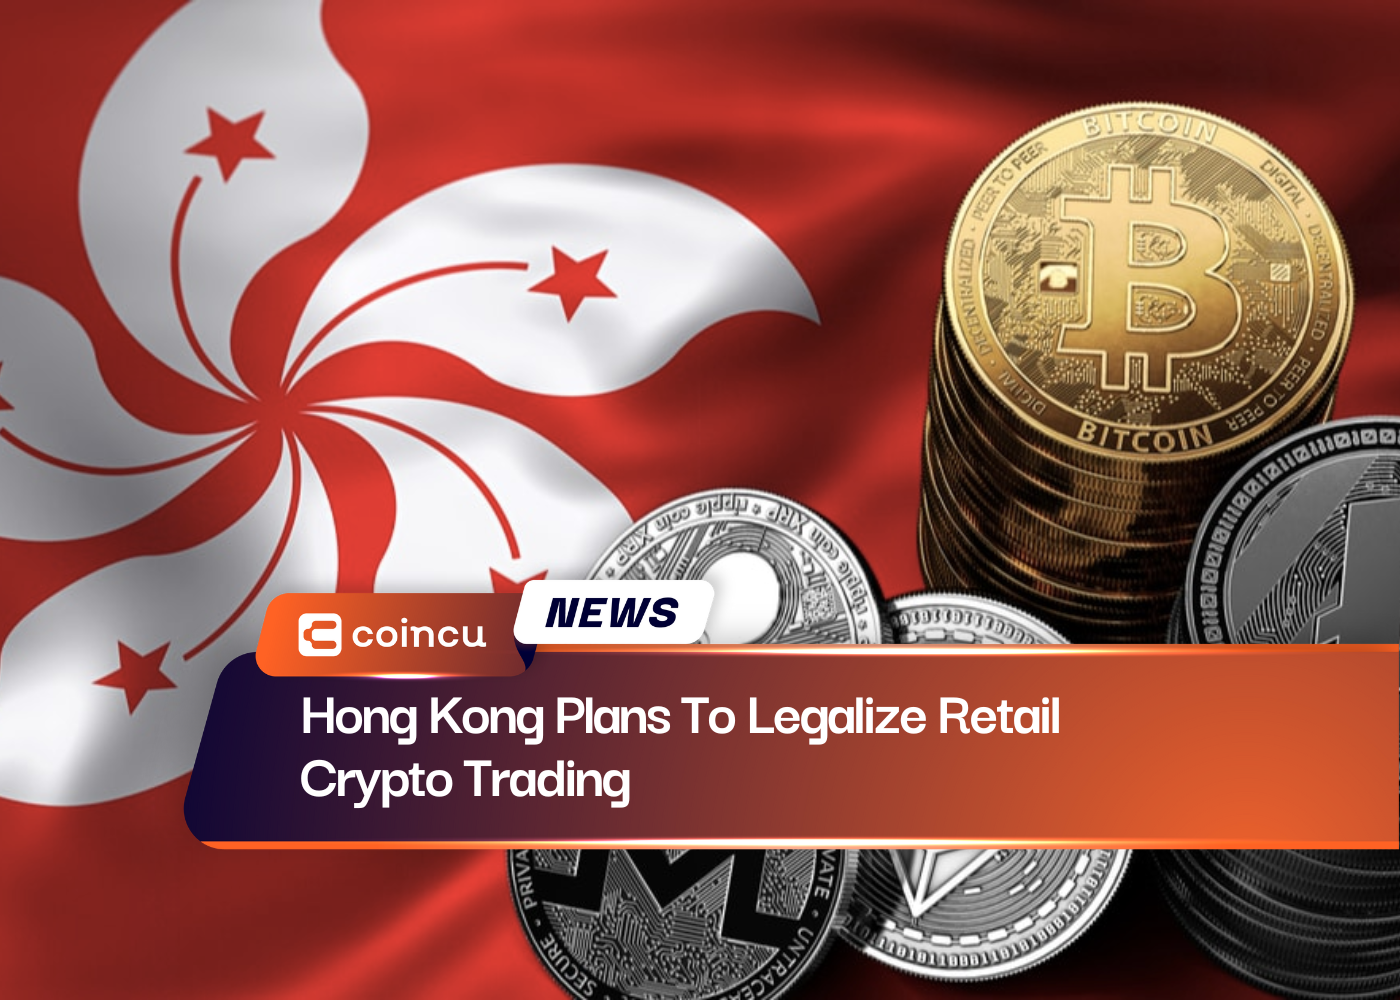 Hong Kong Plans To Legalize Retail Crypto Trading